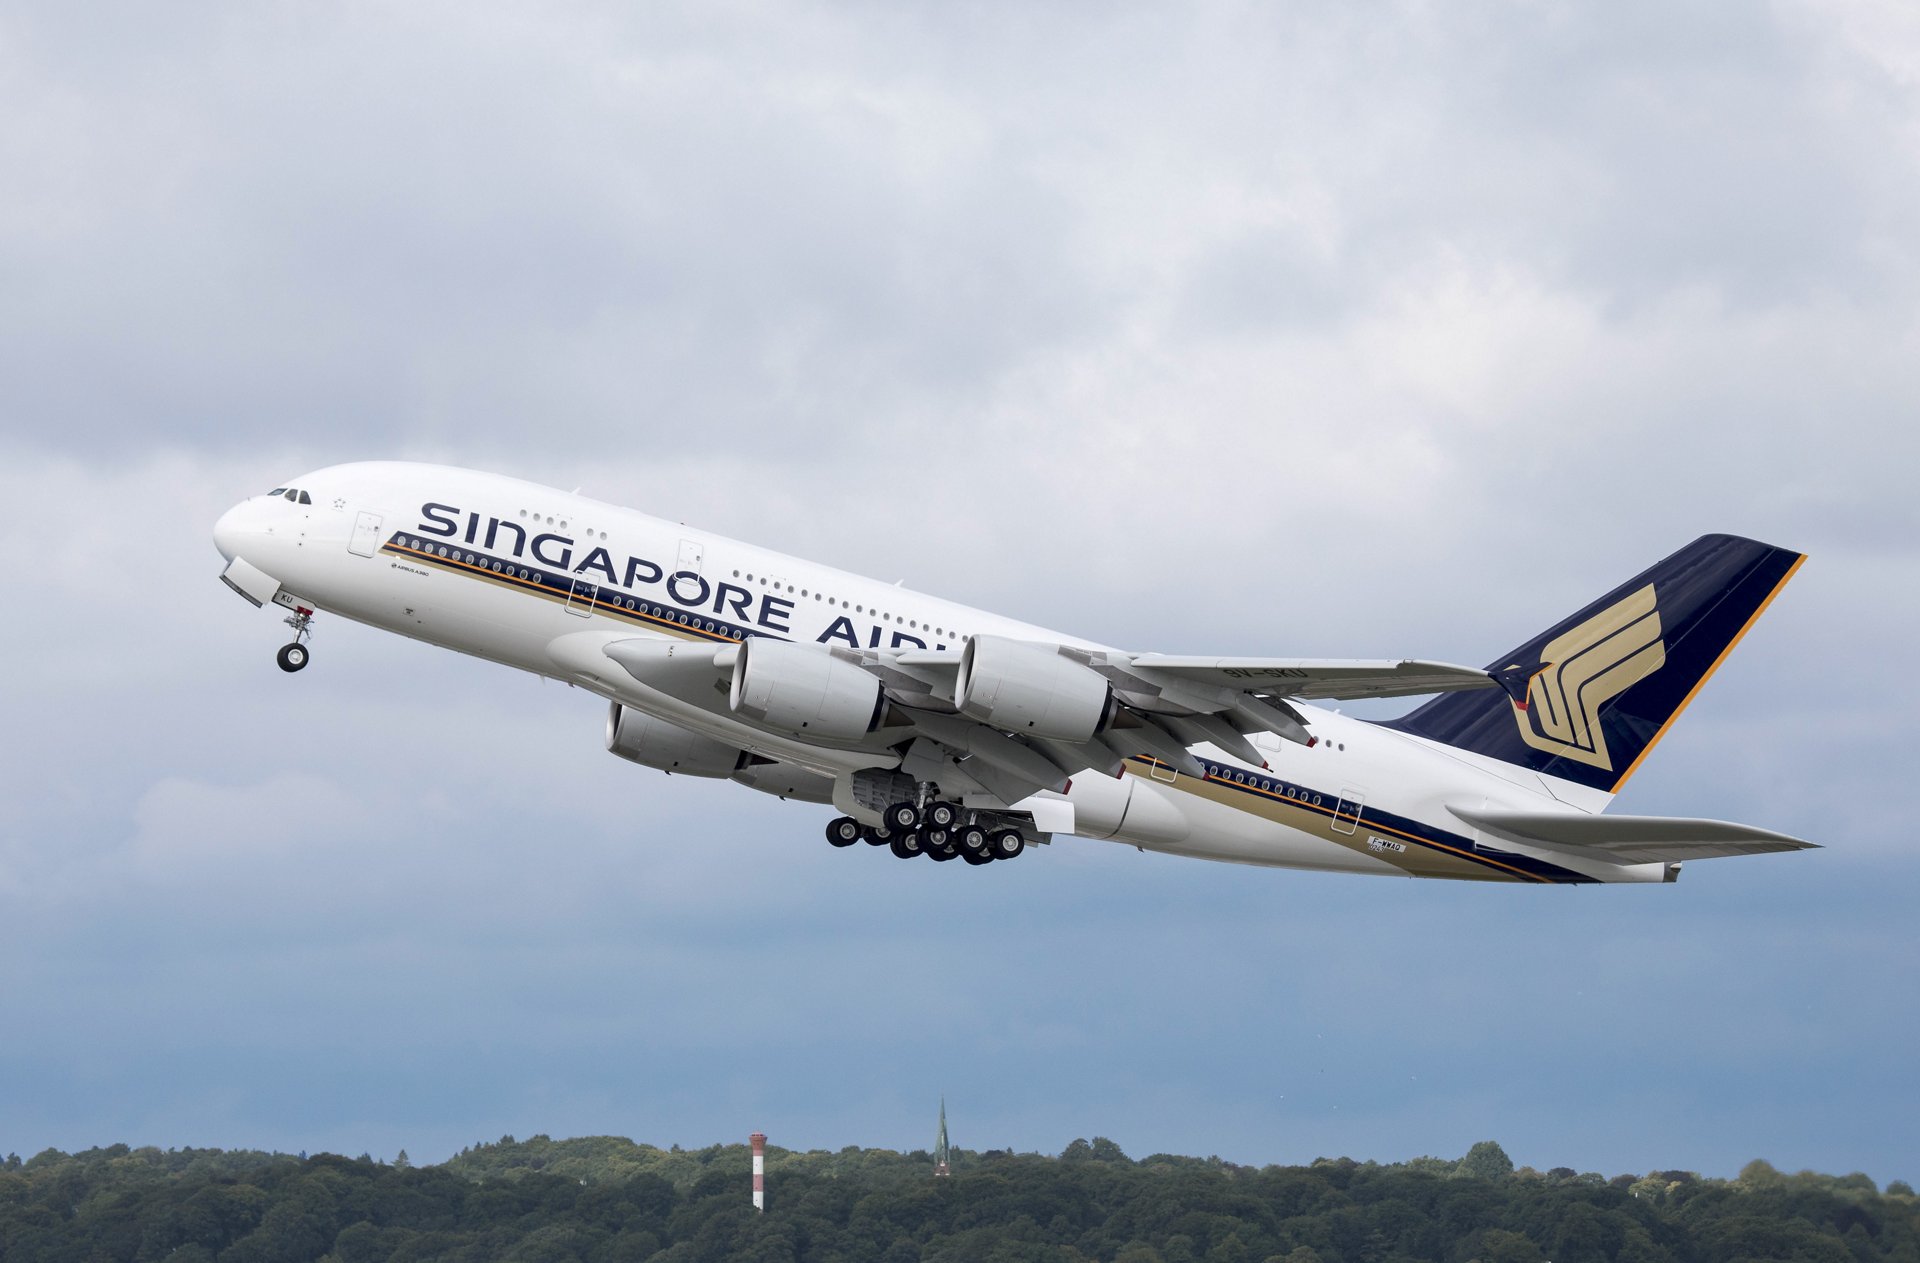 A380 SIA Airbus Copyright ?wid=1920&fit=fit,1&qlt=85,0